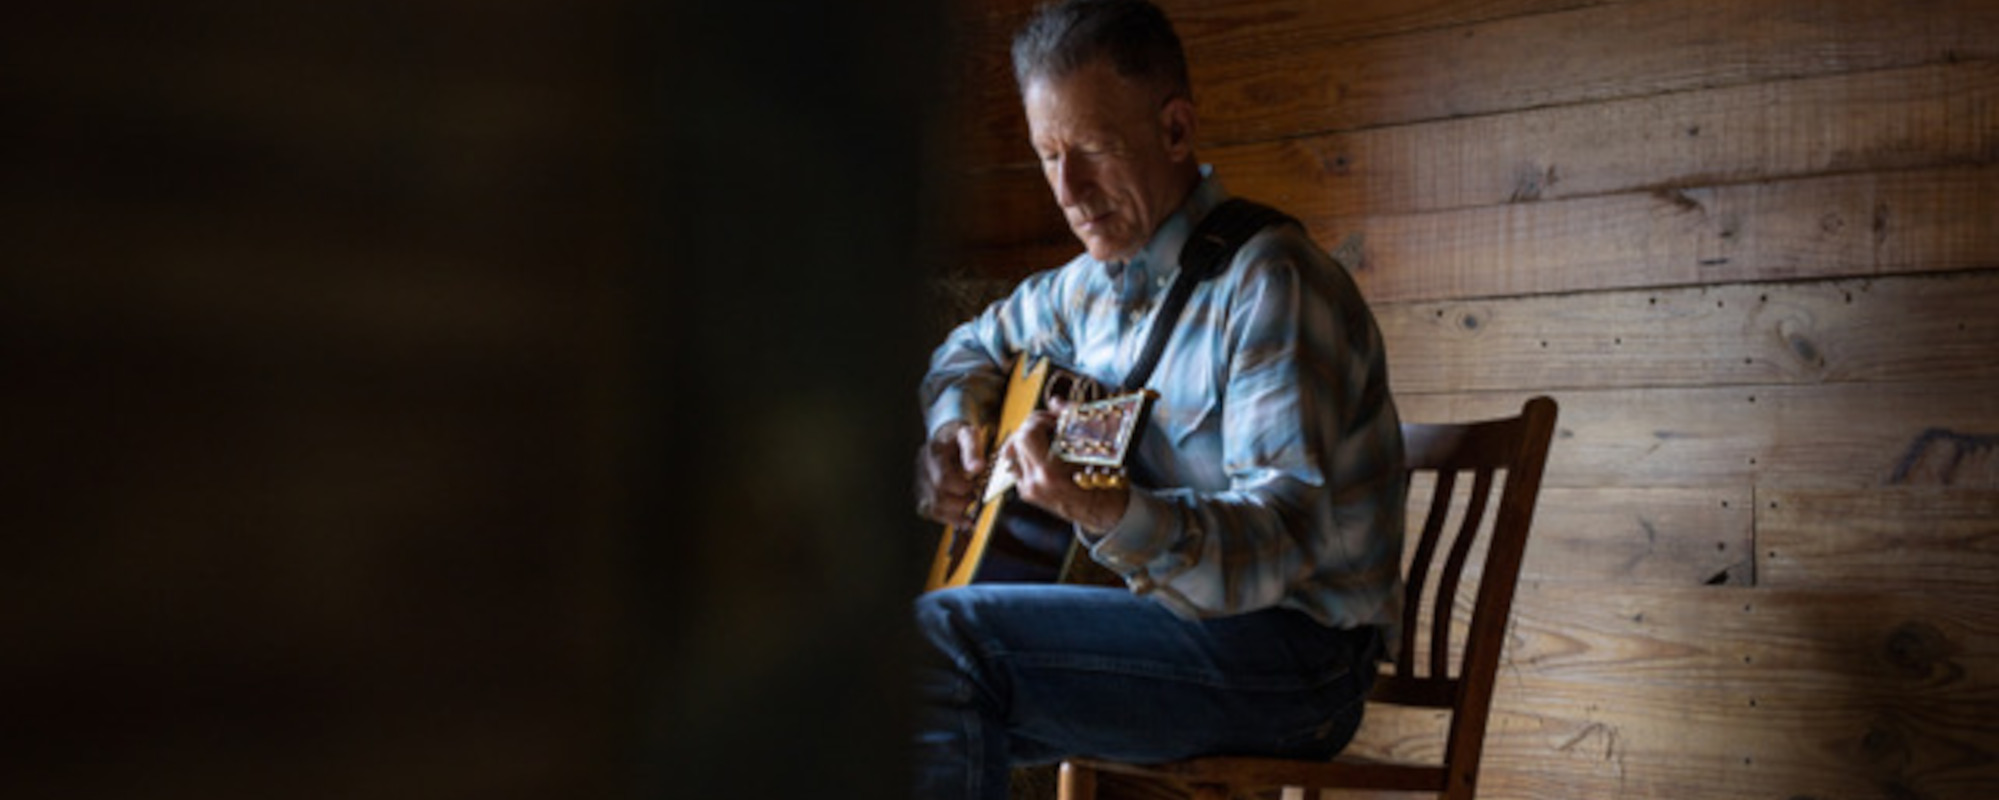 Lyle Lovett: The Same Thing It’s Been Since the Very Beginning